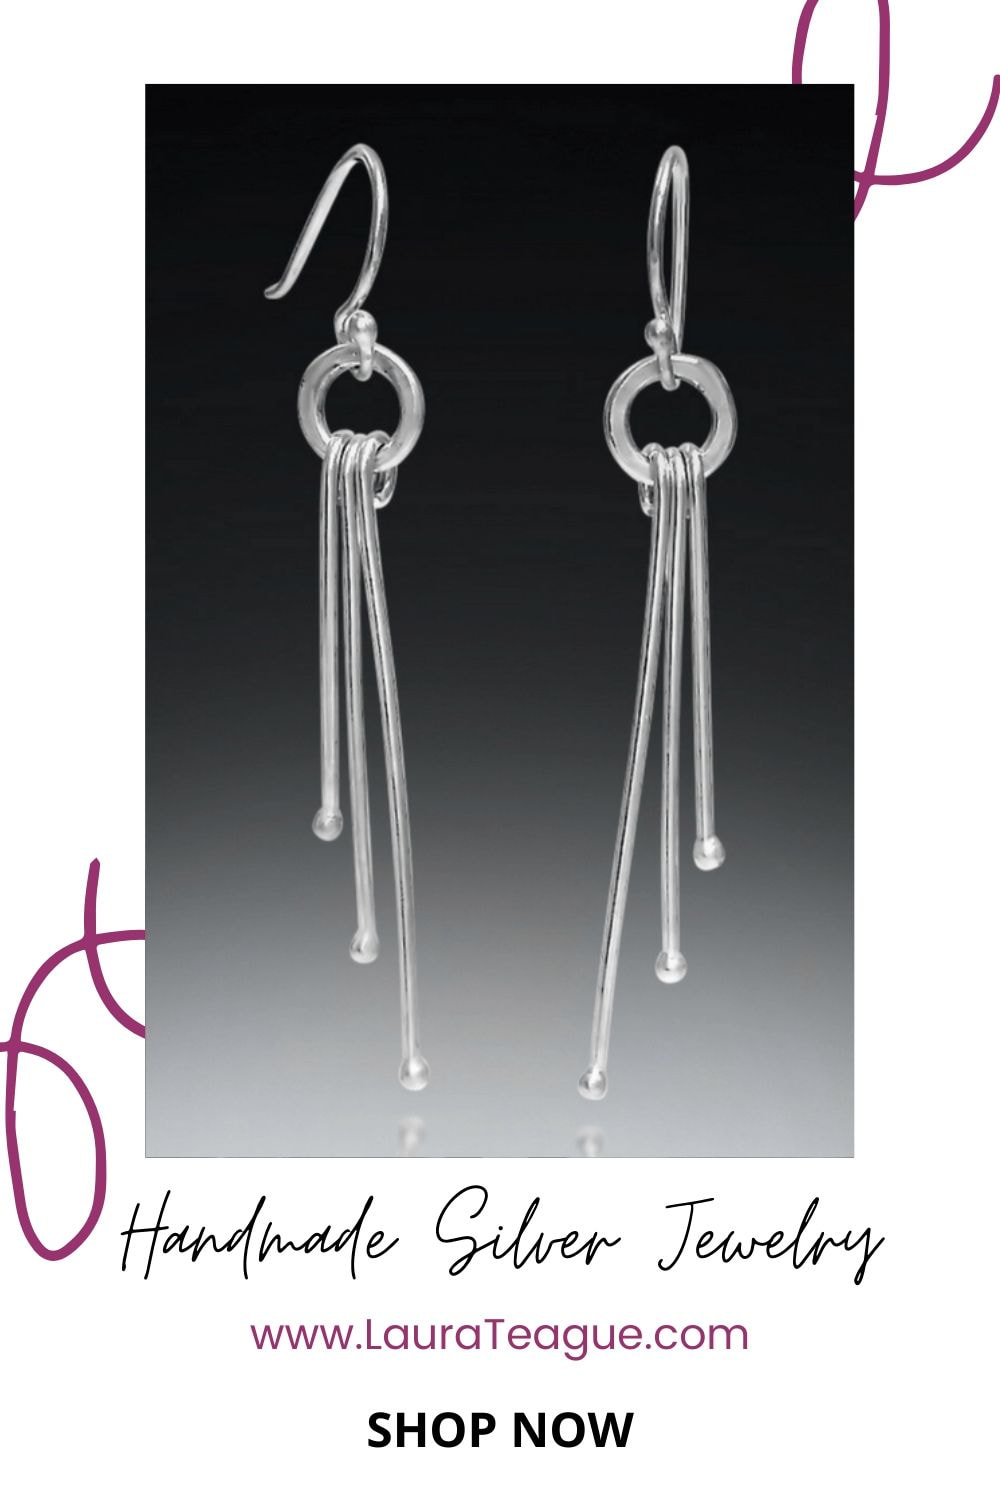 Handcrafted silver jewelry by Laura Teague